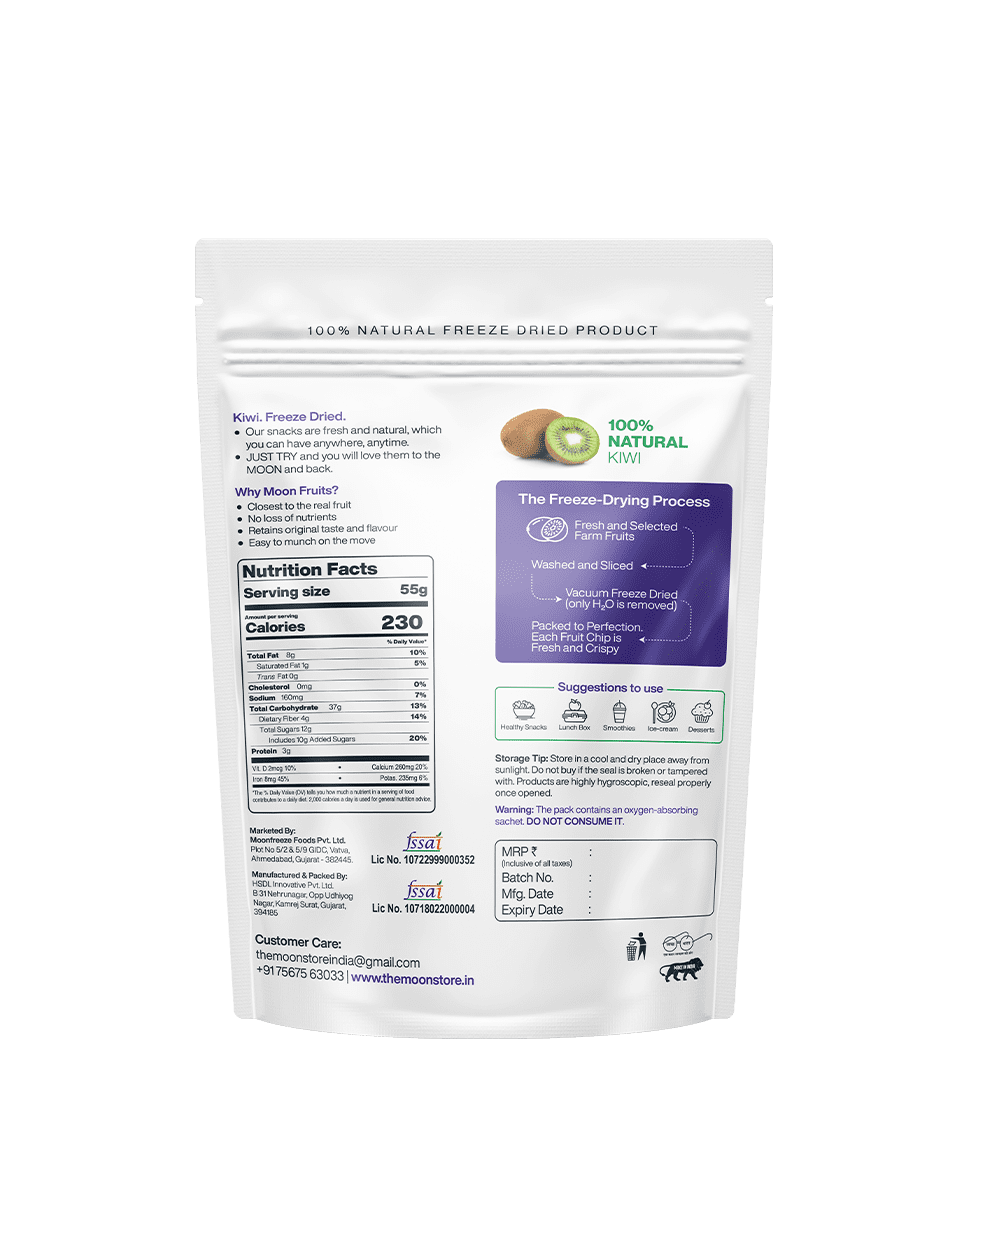 A stand-up pouch of 100% natural MOONFREEZE FOODS PRIVATE LIMITED Freeze Dried Chikoo + Kiwi with nutritional information and a kiwi slice image on the front promises a nutrient-rich snacking experience.